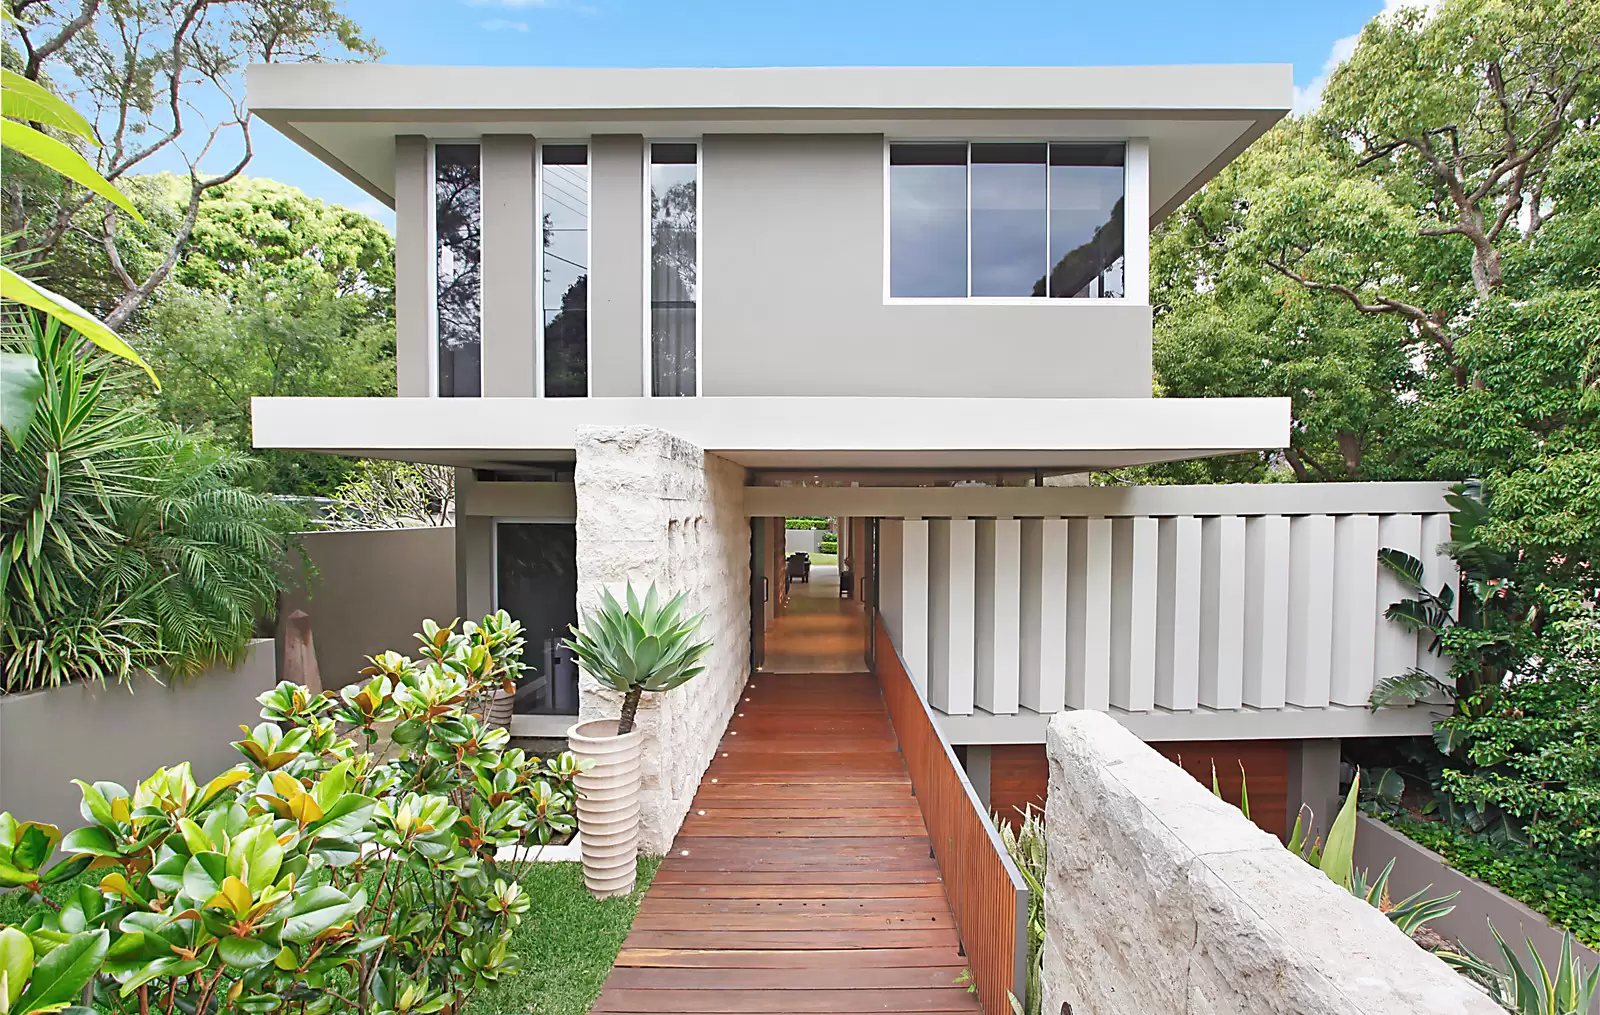 Photo #2: 20 Fitzwilliam Road, Vaucluse - Sold by Sydney Sotheby's International Realty